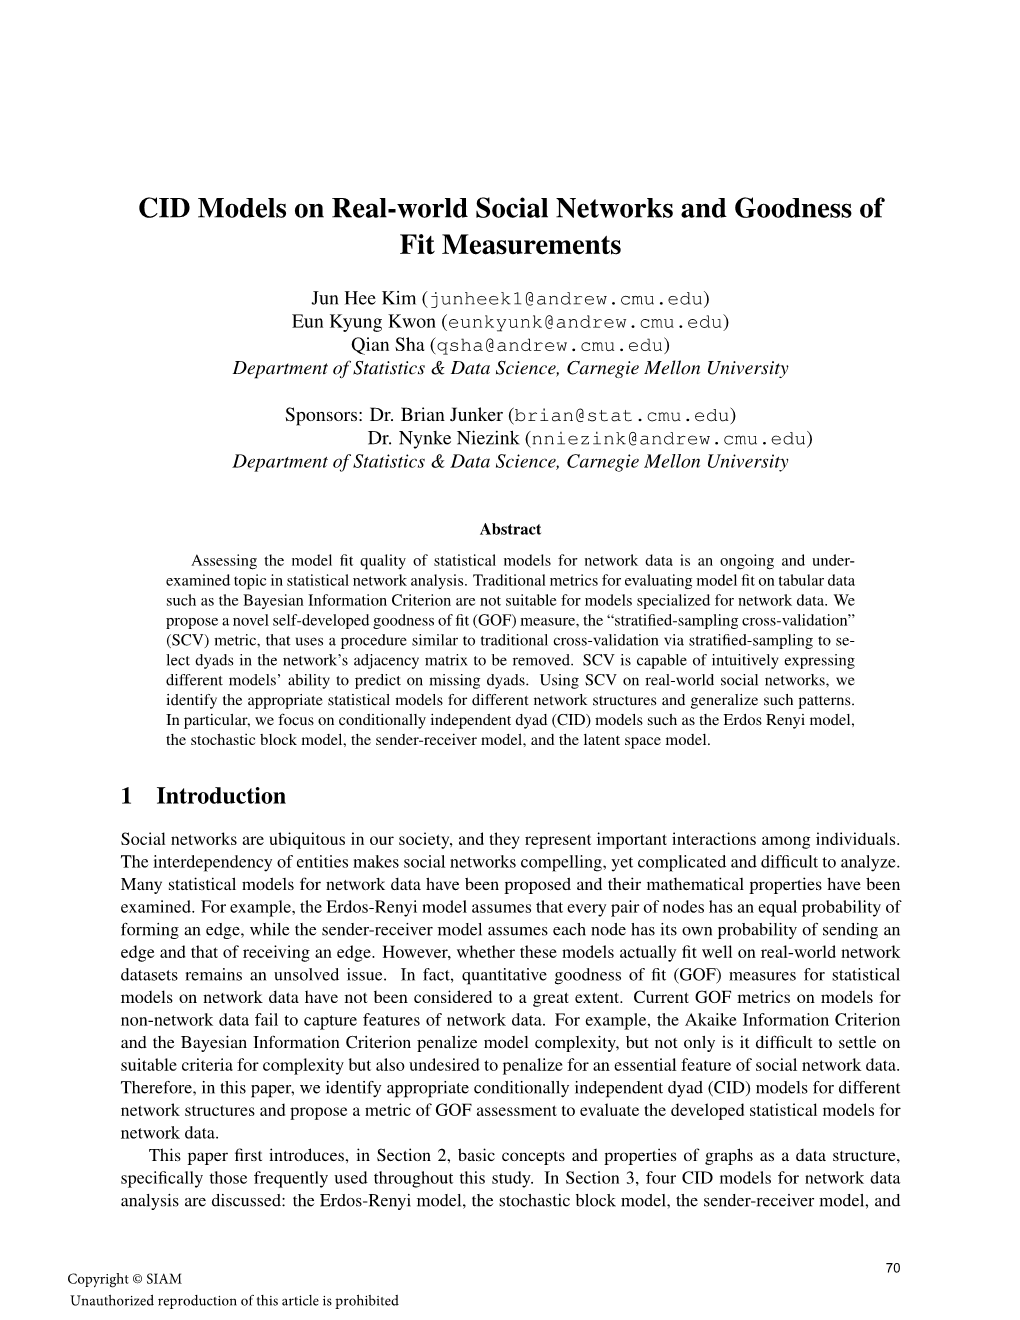 CID Models on Real-World Social Networks and Goodness of Fit Measurements